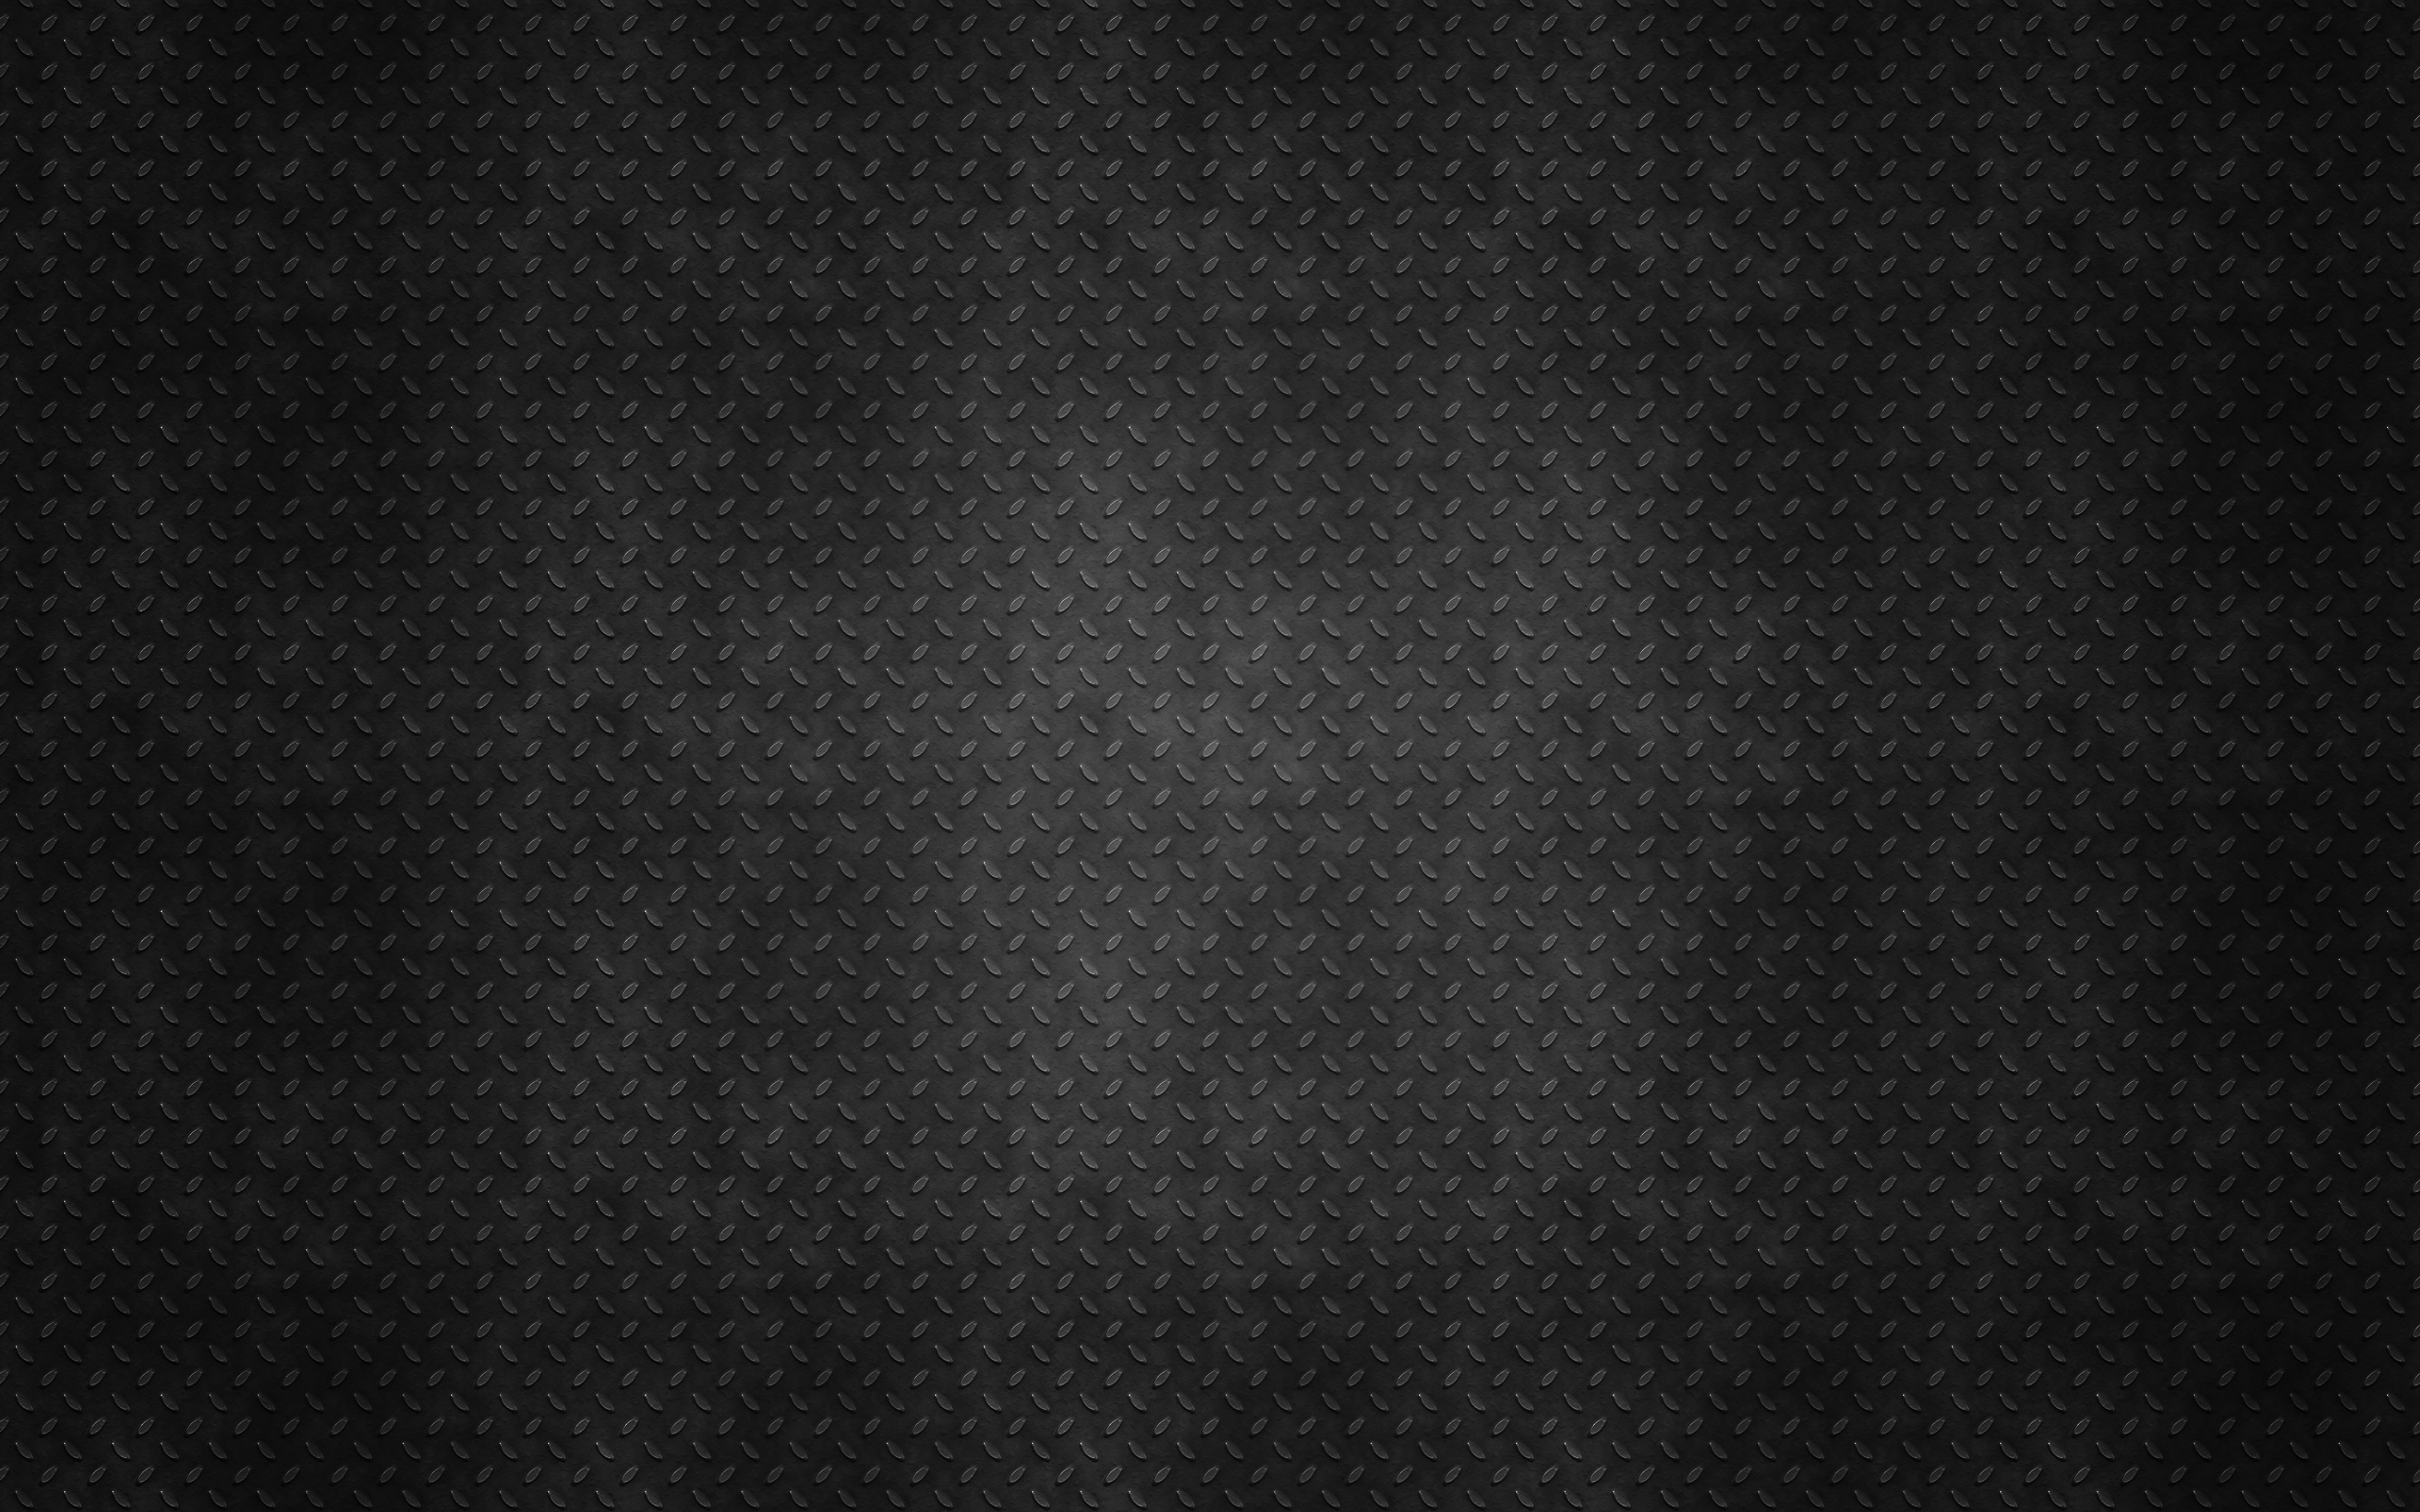 Black Metal Textured Abstract Background Wallpaper